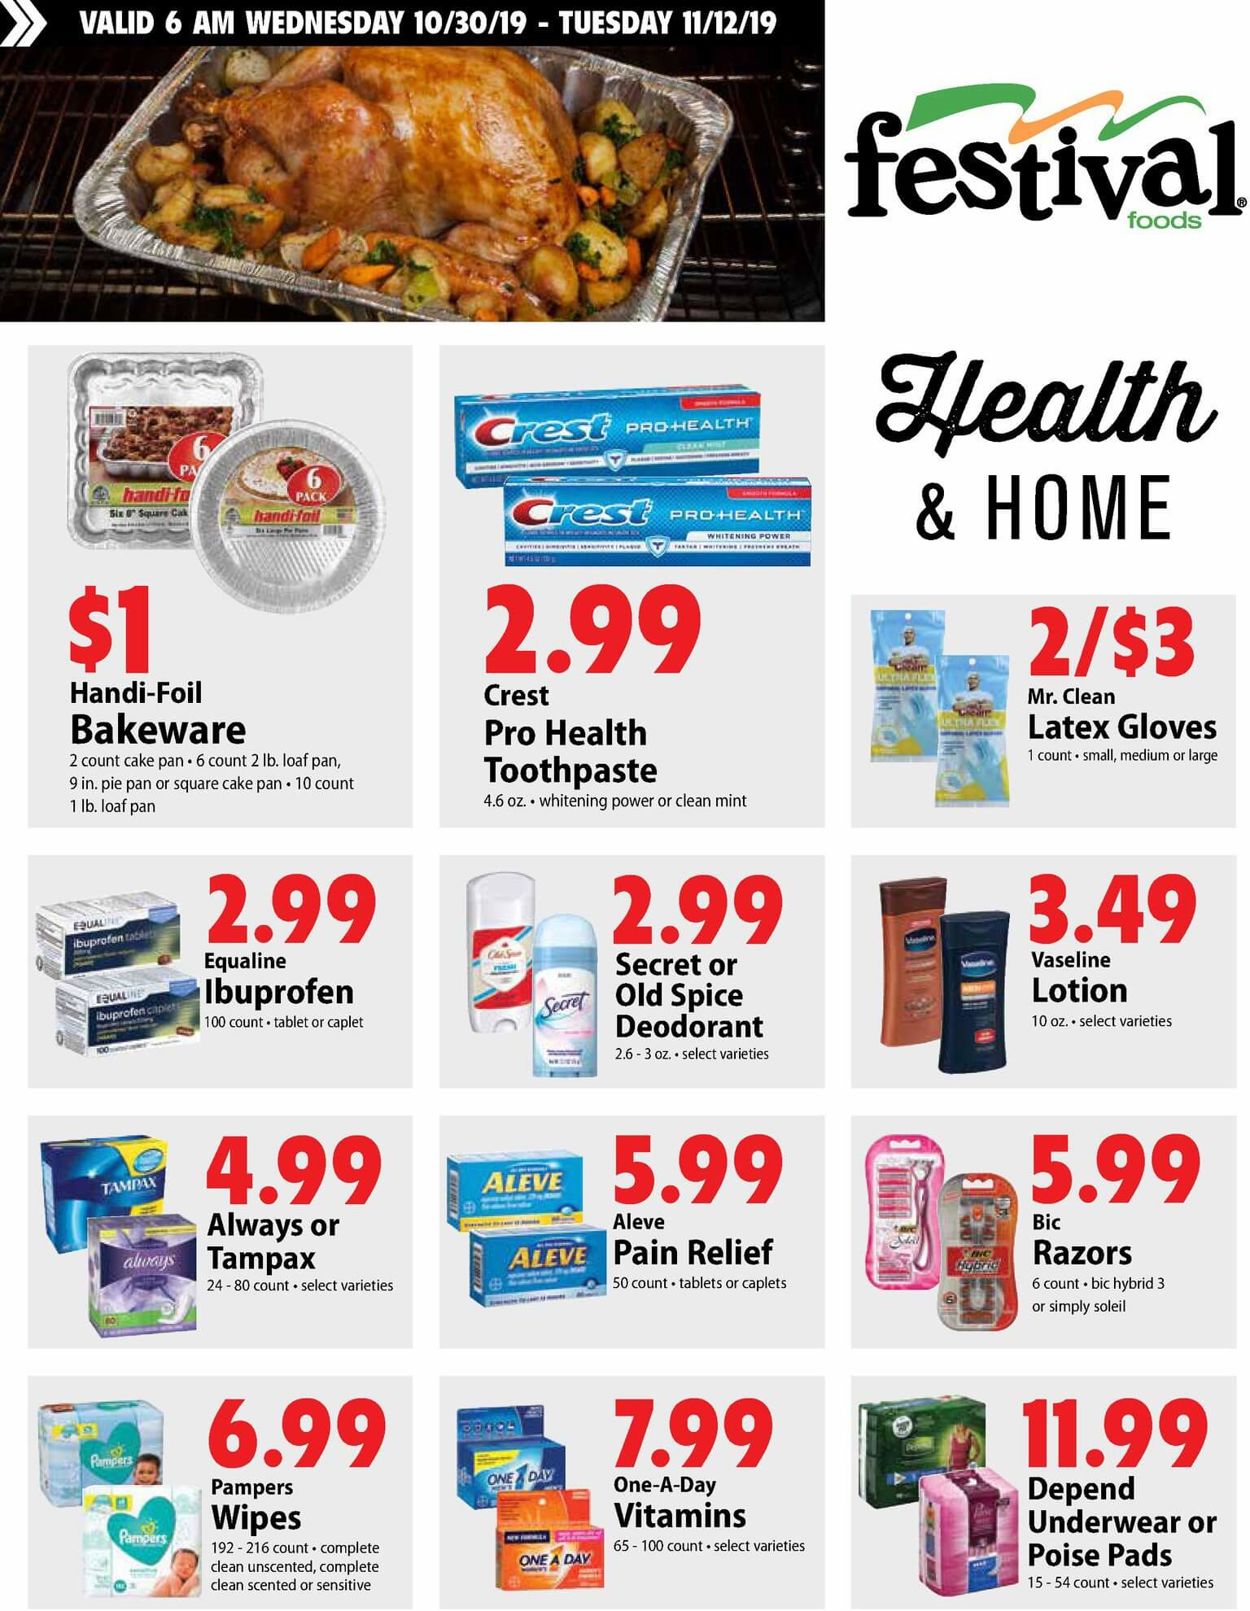 Festival Foods Current weekly ad 11/06 - 11/12/2019 [10] - frequent-ads.com